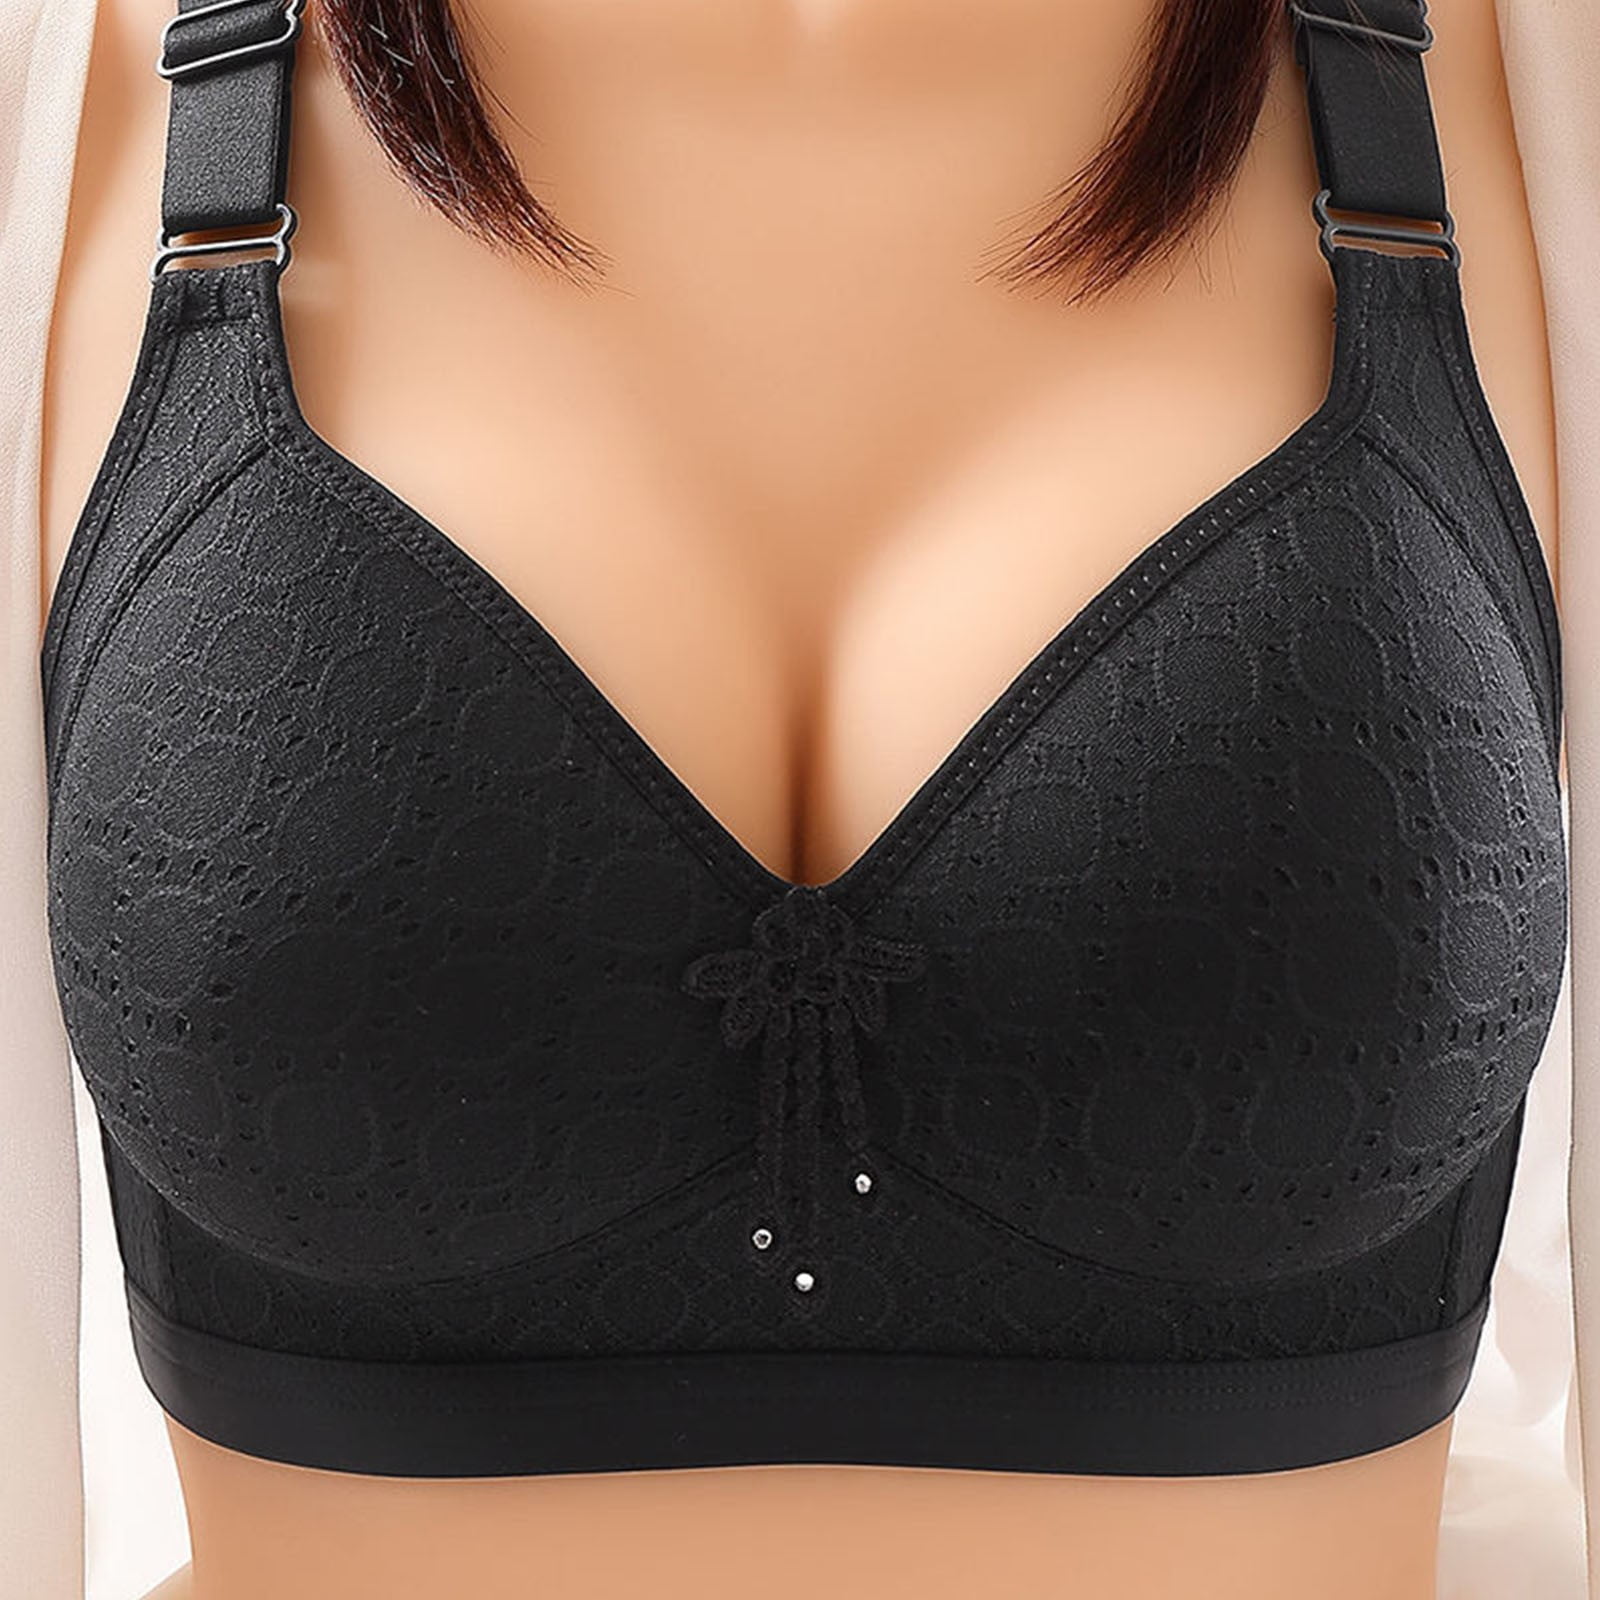 Lastesso Push up Bras for Women Plus Size No Underwire Bralettes Everyday  Wear Full Coverage Wireless Bras Adjustable Straps 